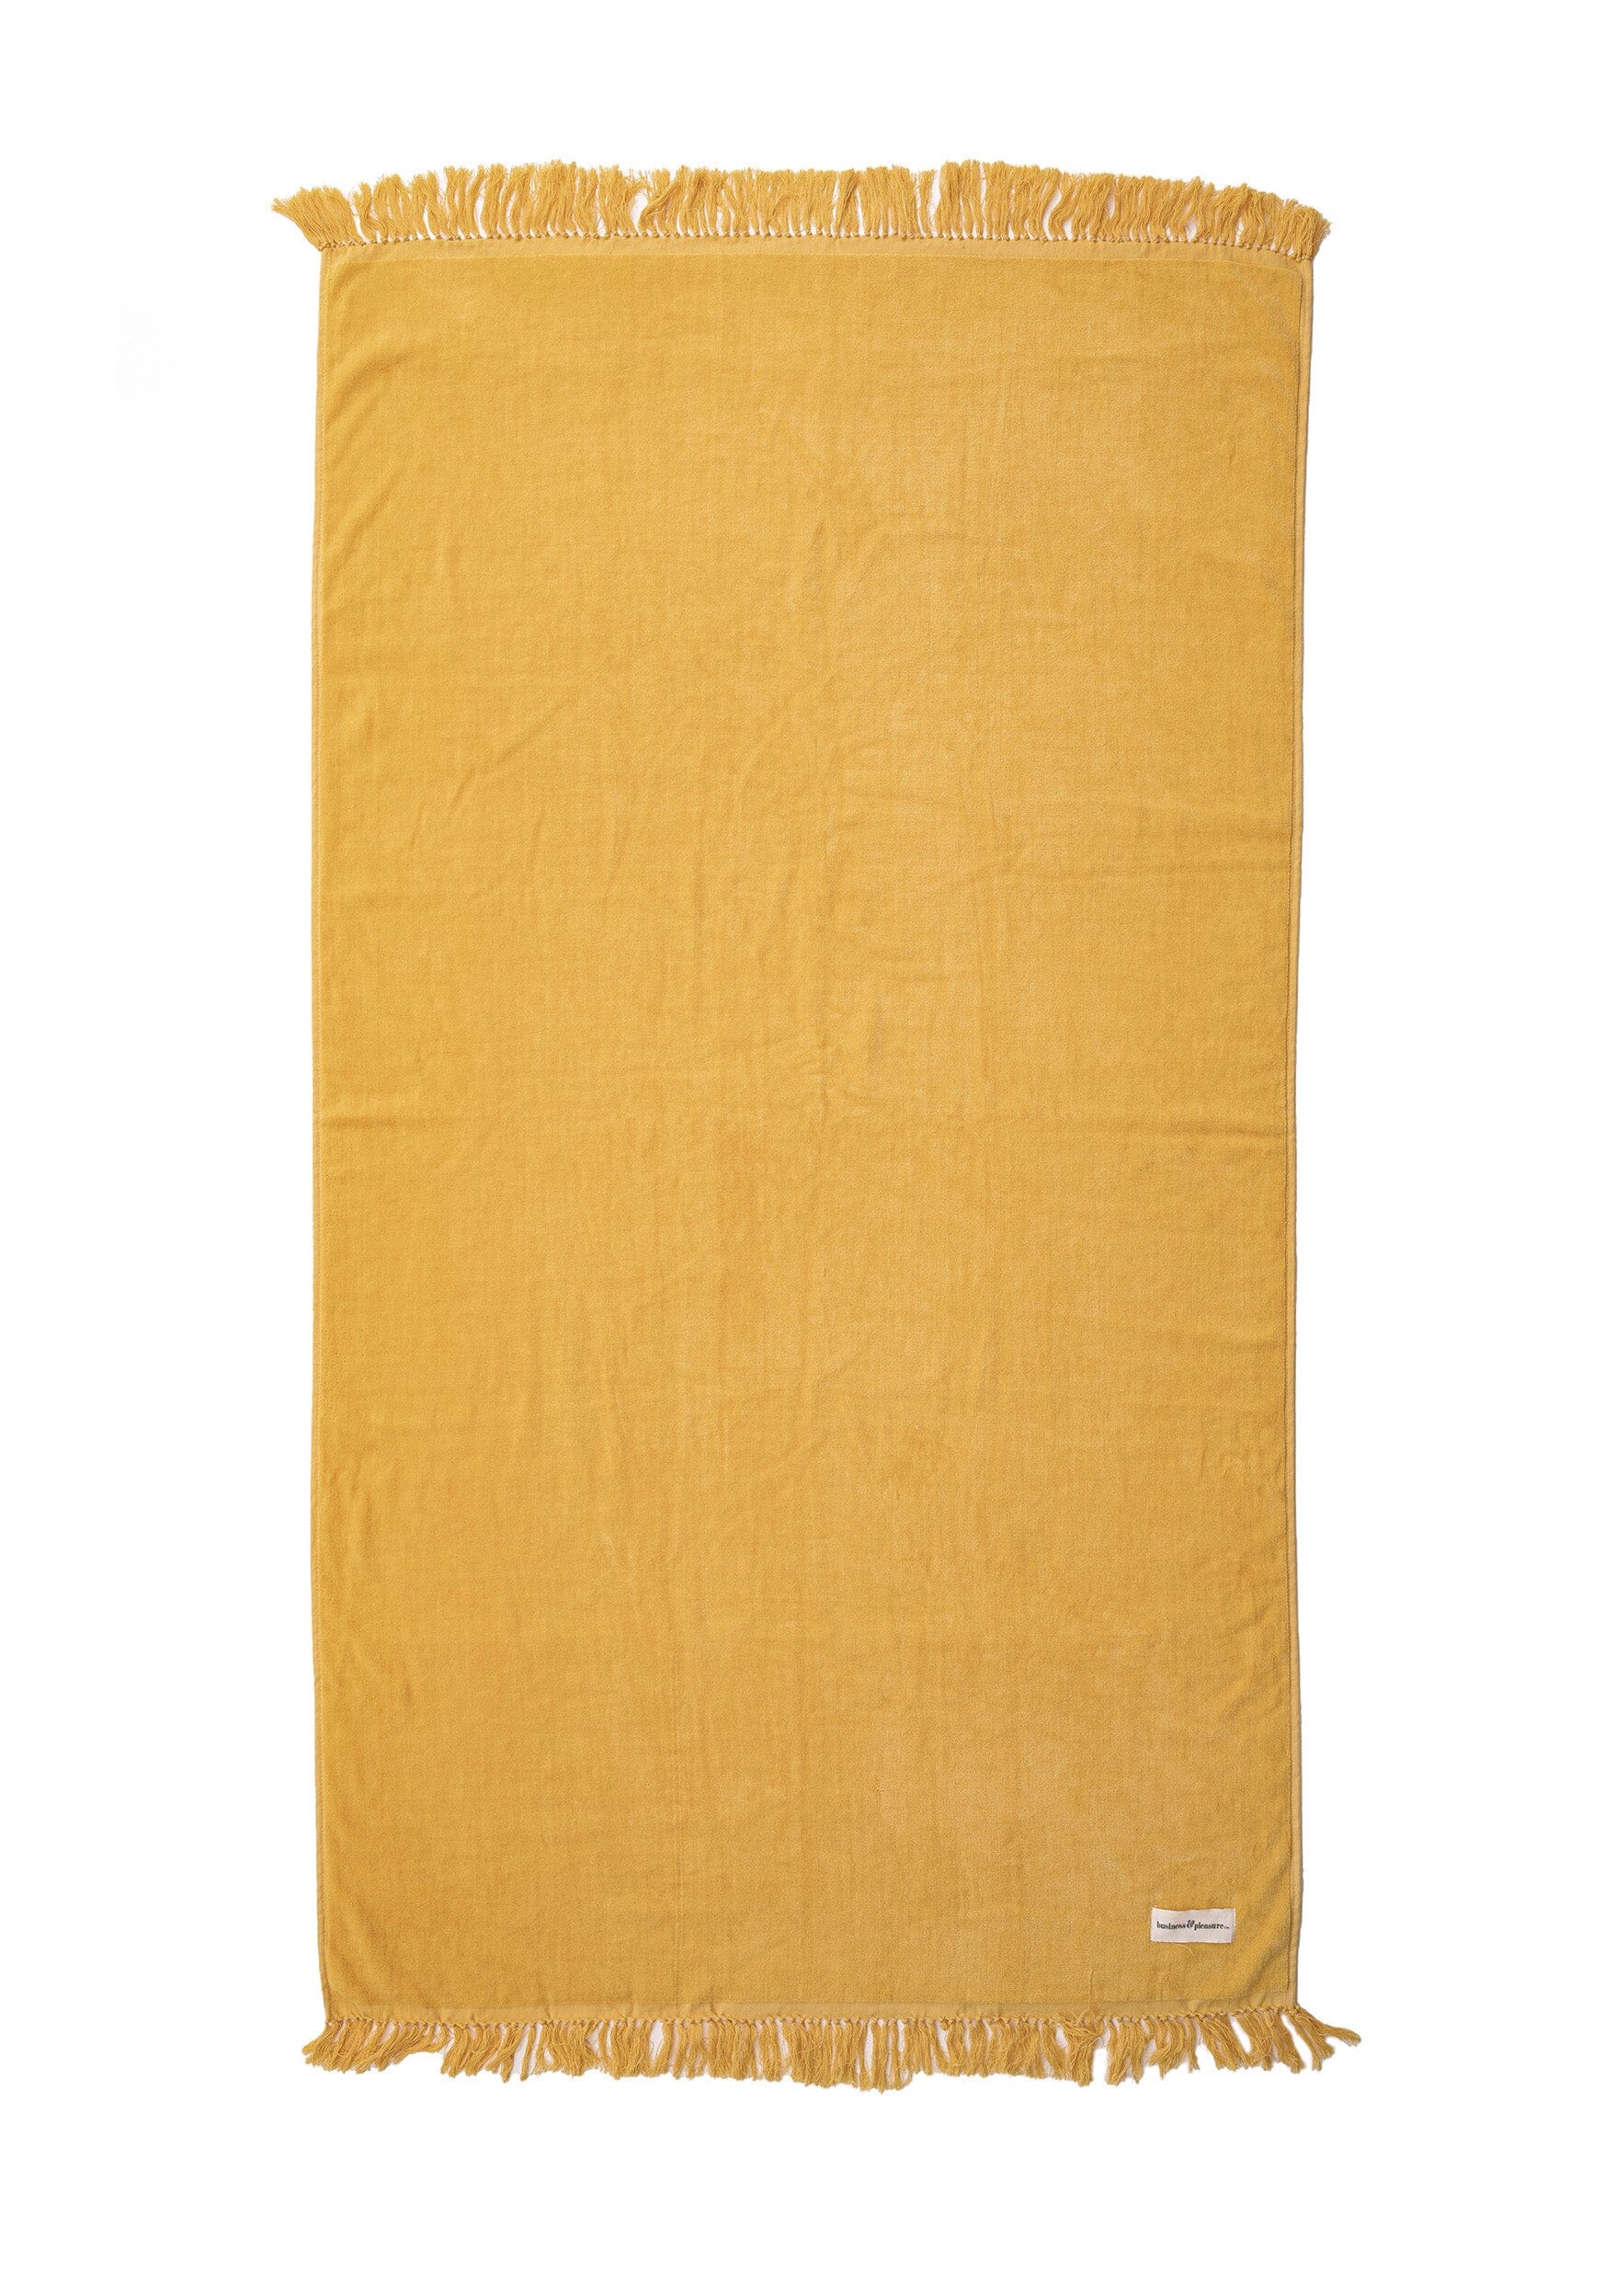 The Beach Towel - Vintage Gold